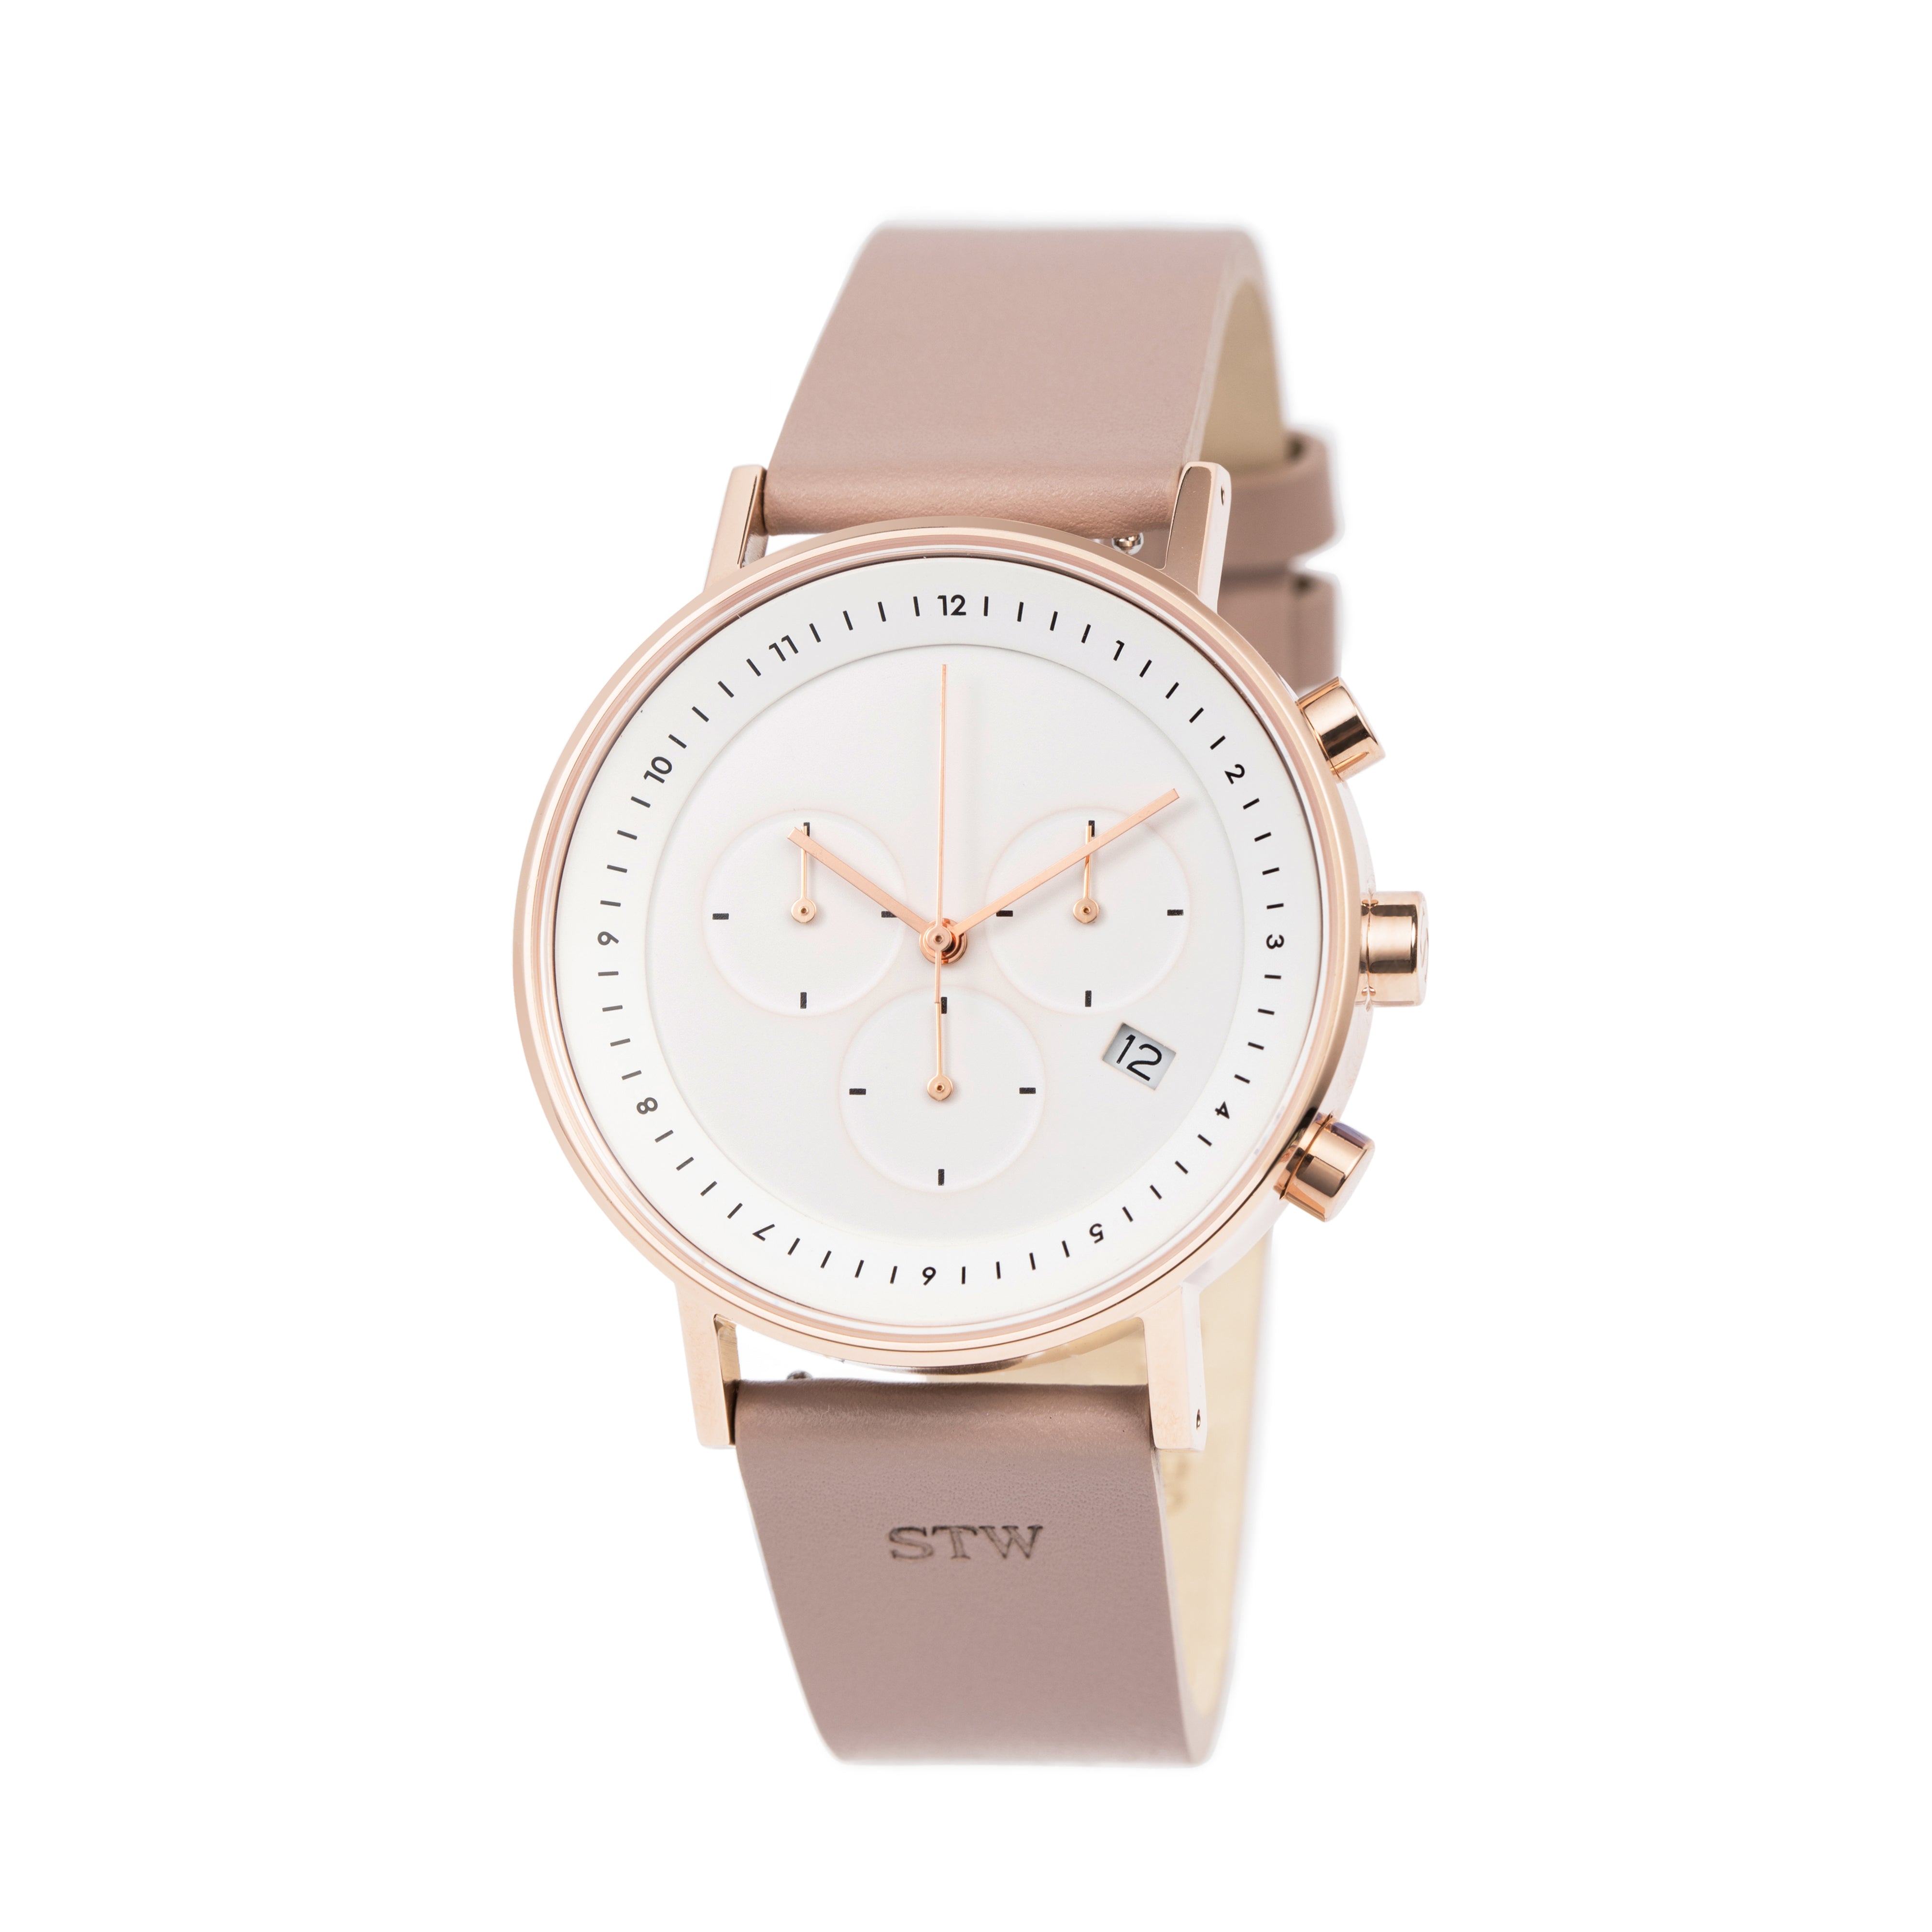 THE CHRONO - WHITE DIAL / PINK LEATHER STRAP WATCH